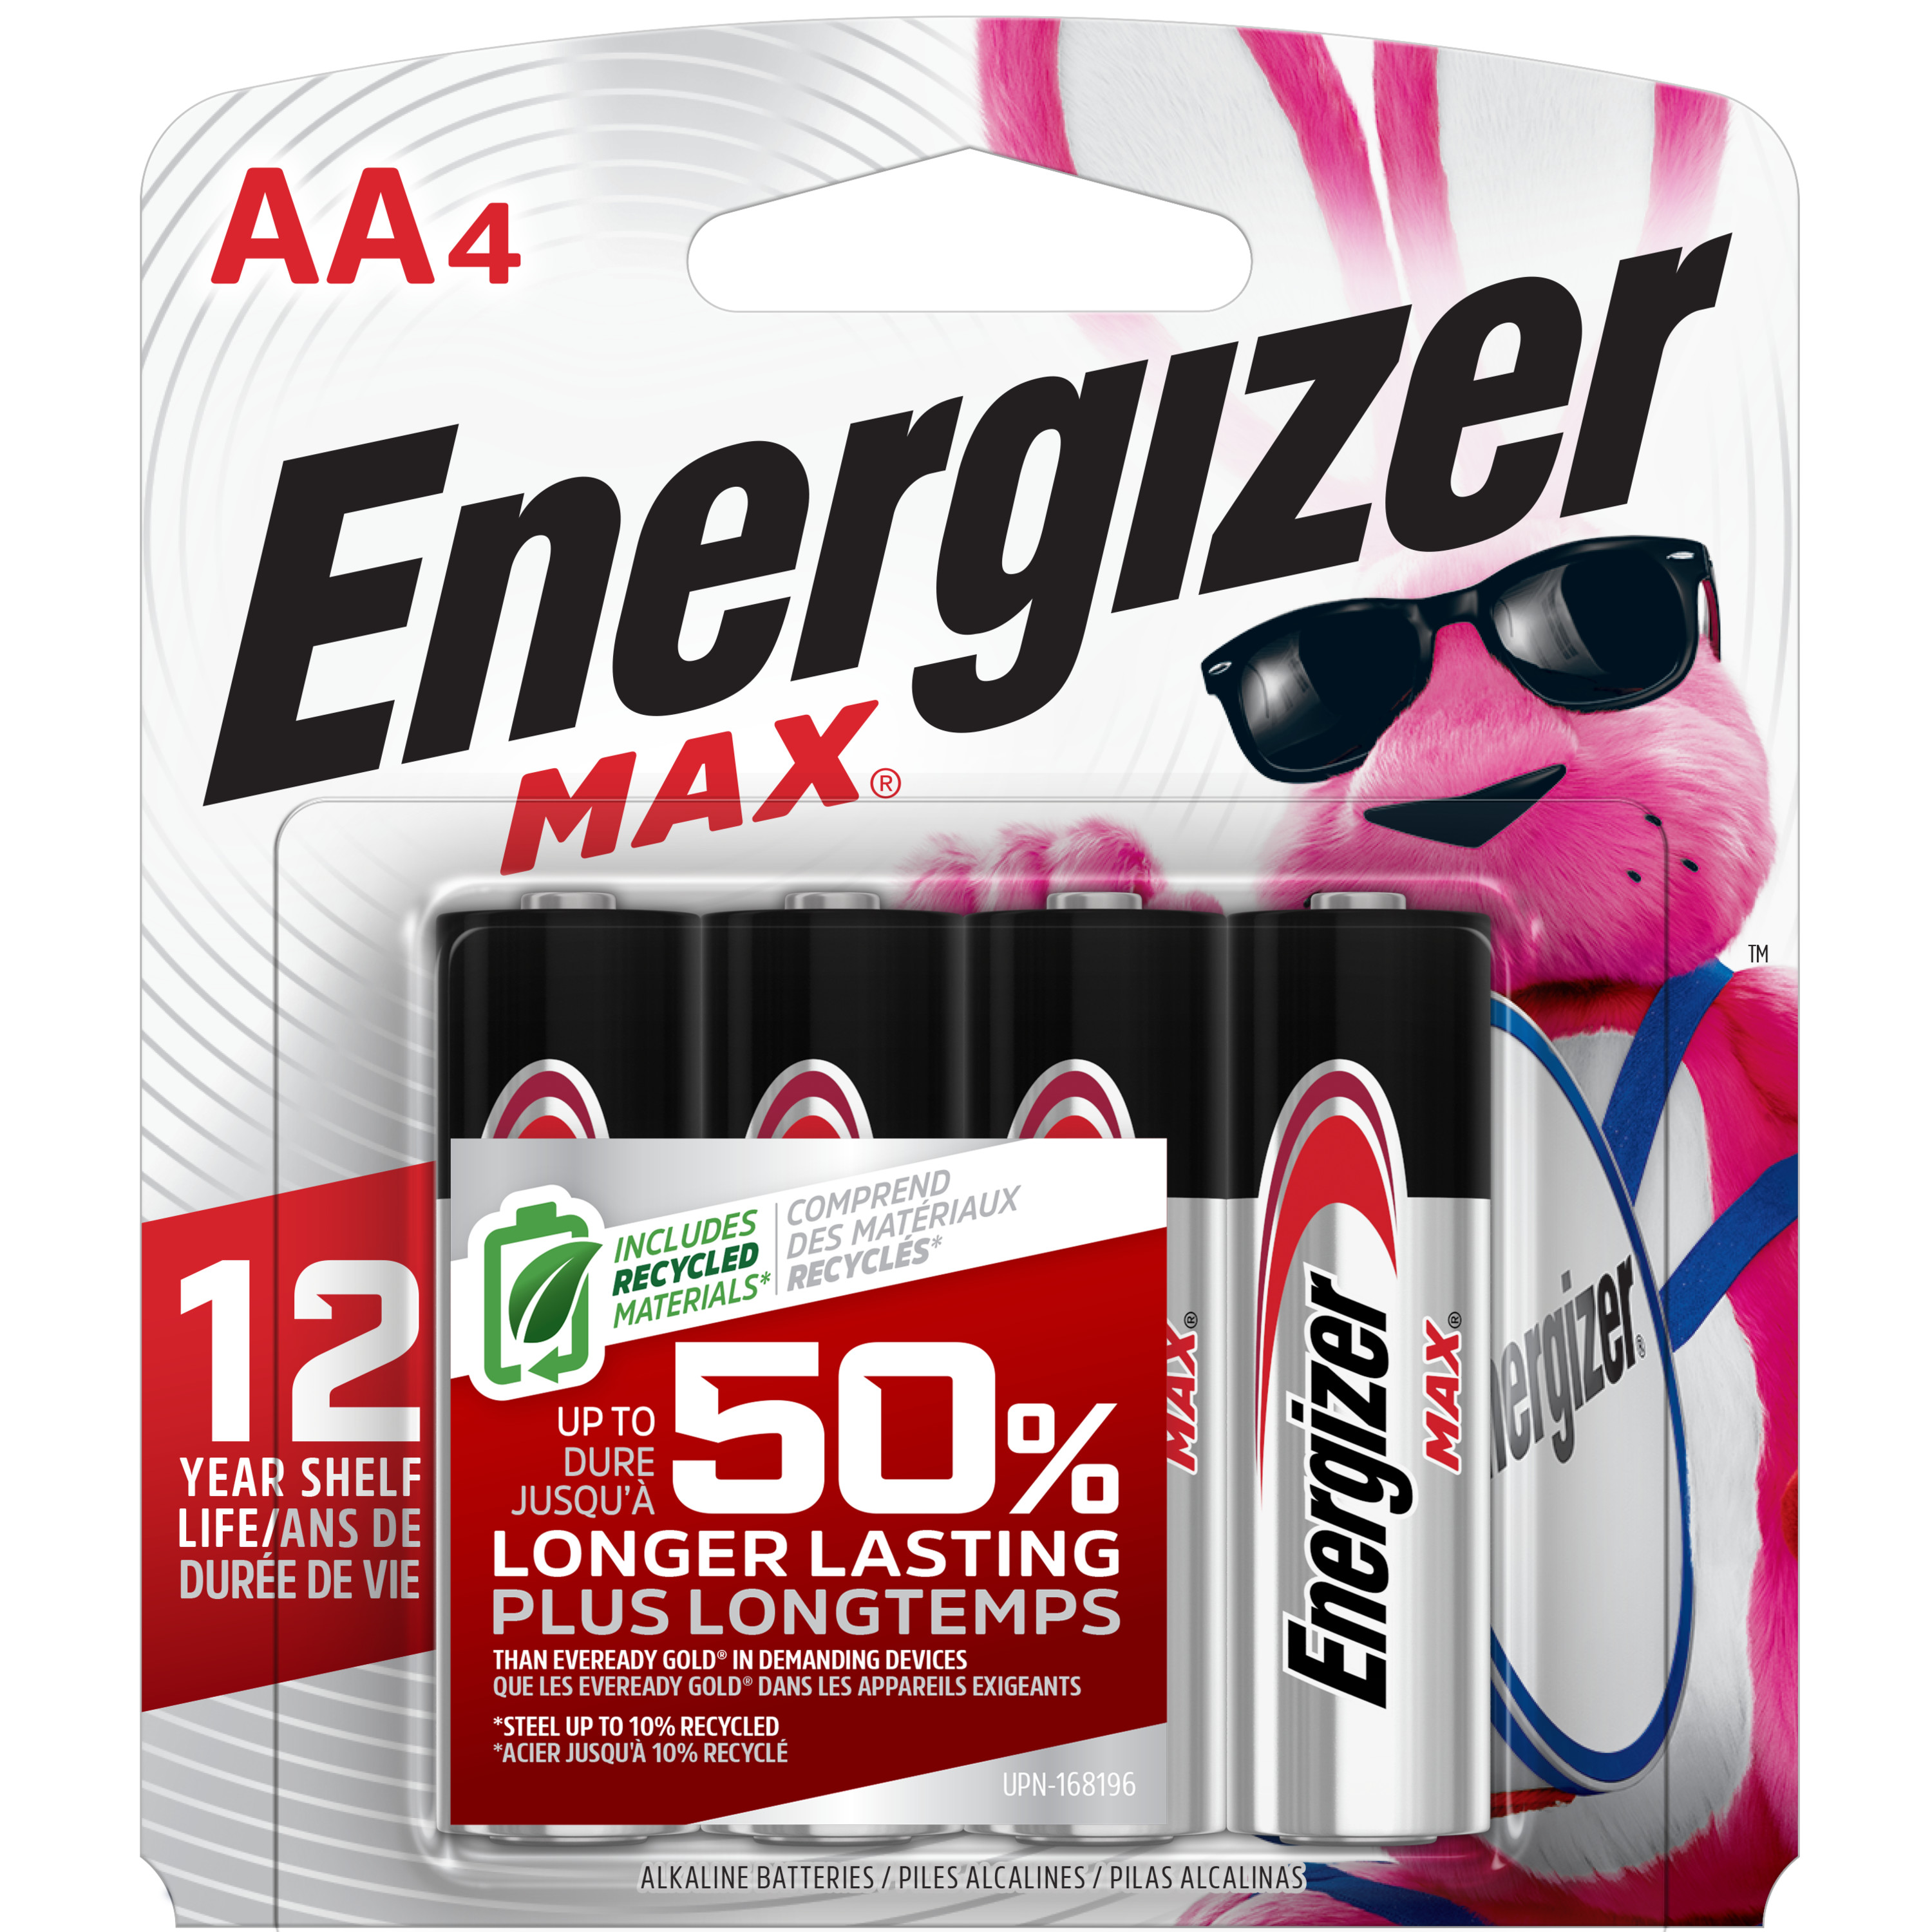 Energizer MAX AA Batteries (4 Pack), Double A Alkaline Batteries - image 1 of 15